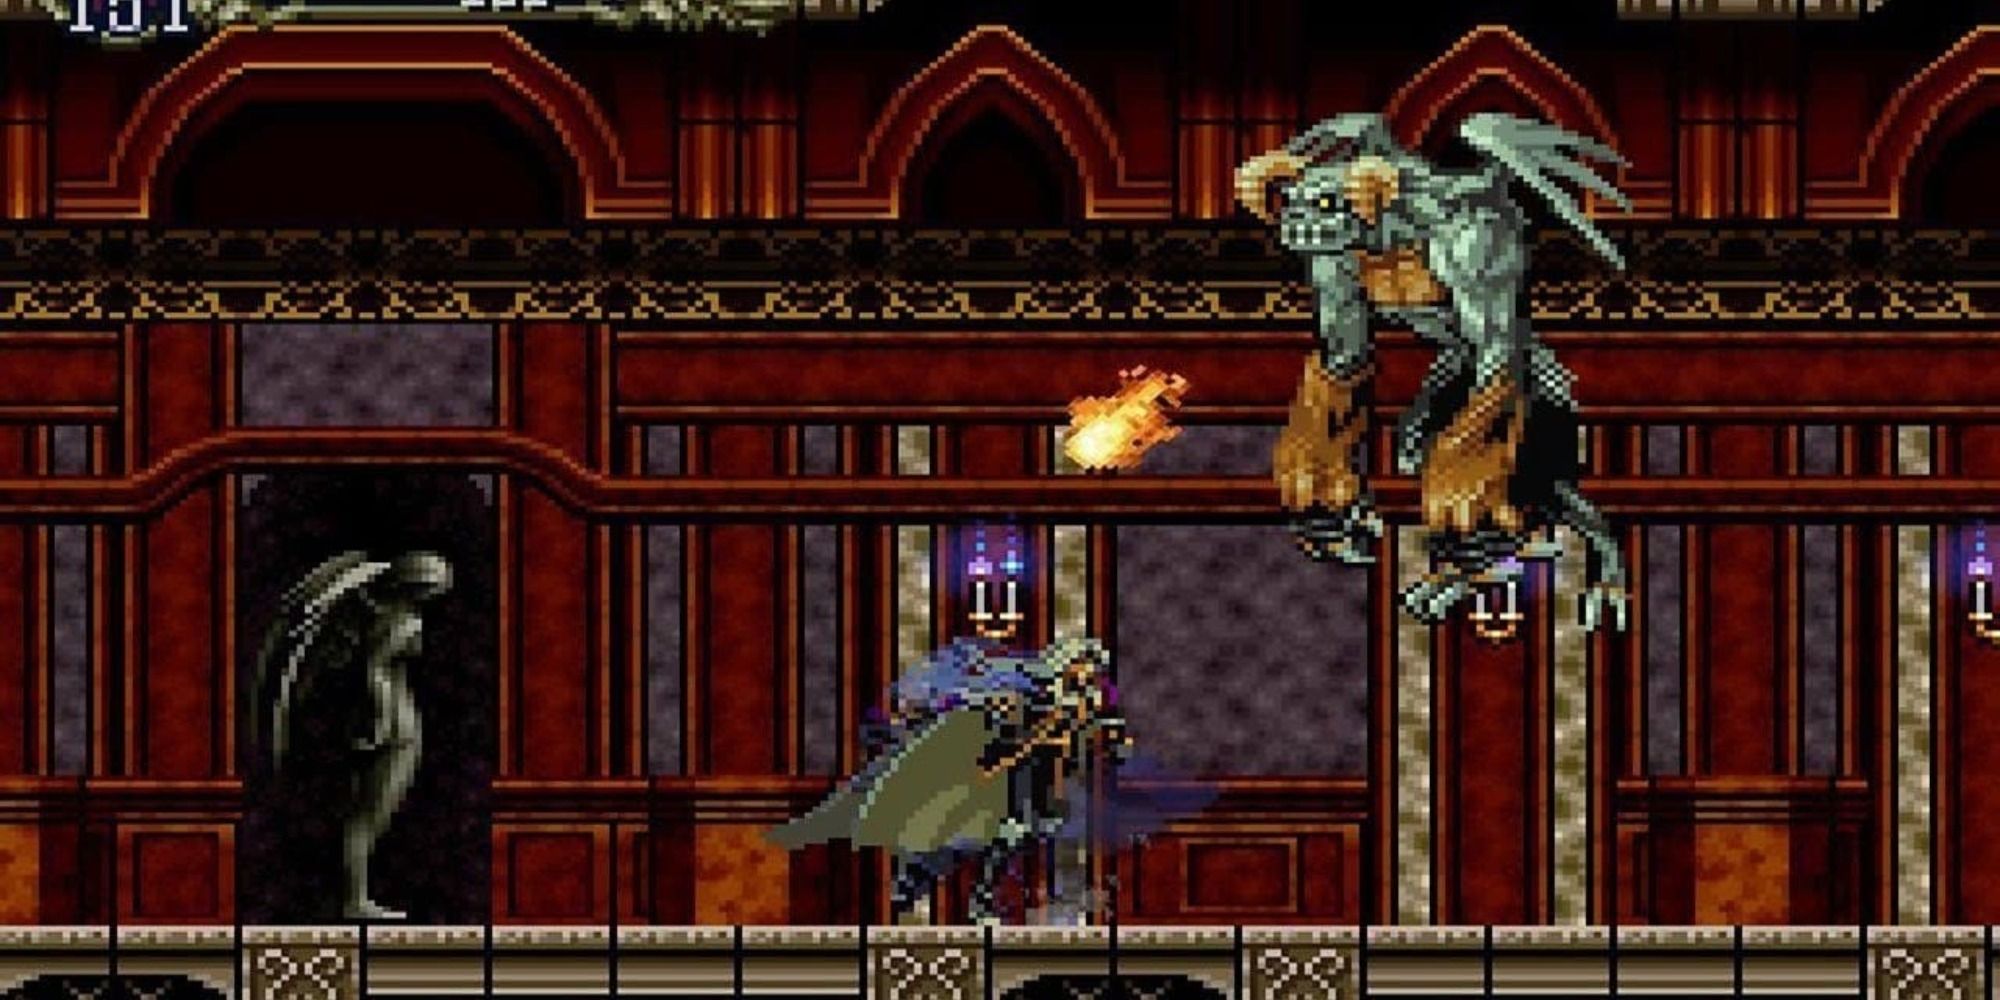 An image of the player fighting a gargoyle like creature in Castlevania Symphony of the Night